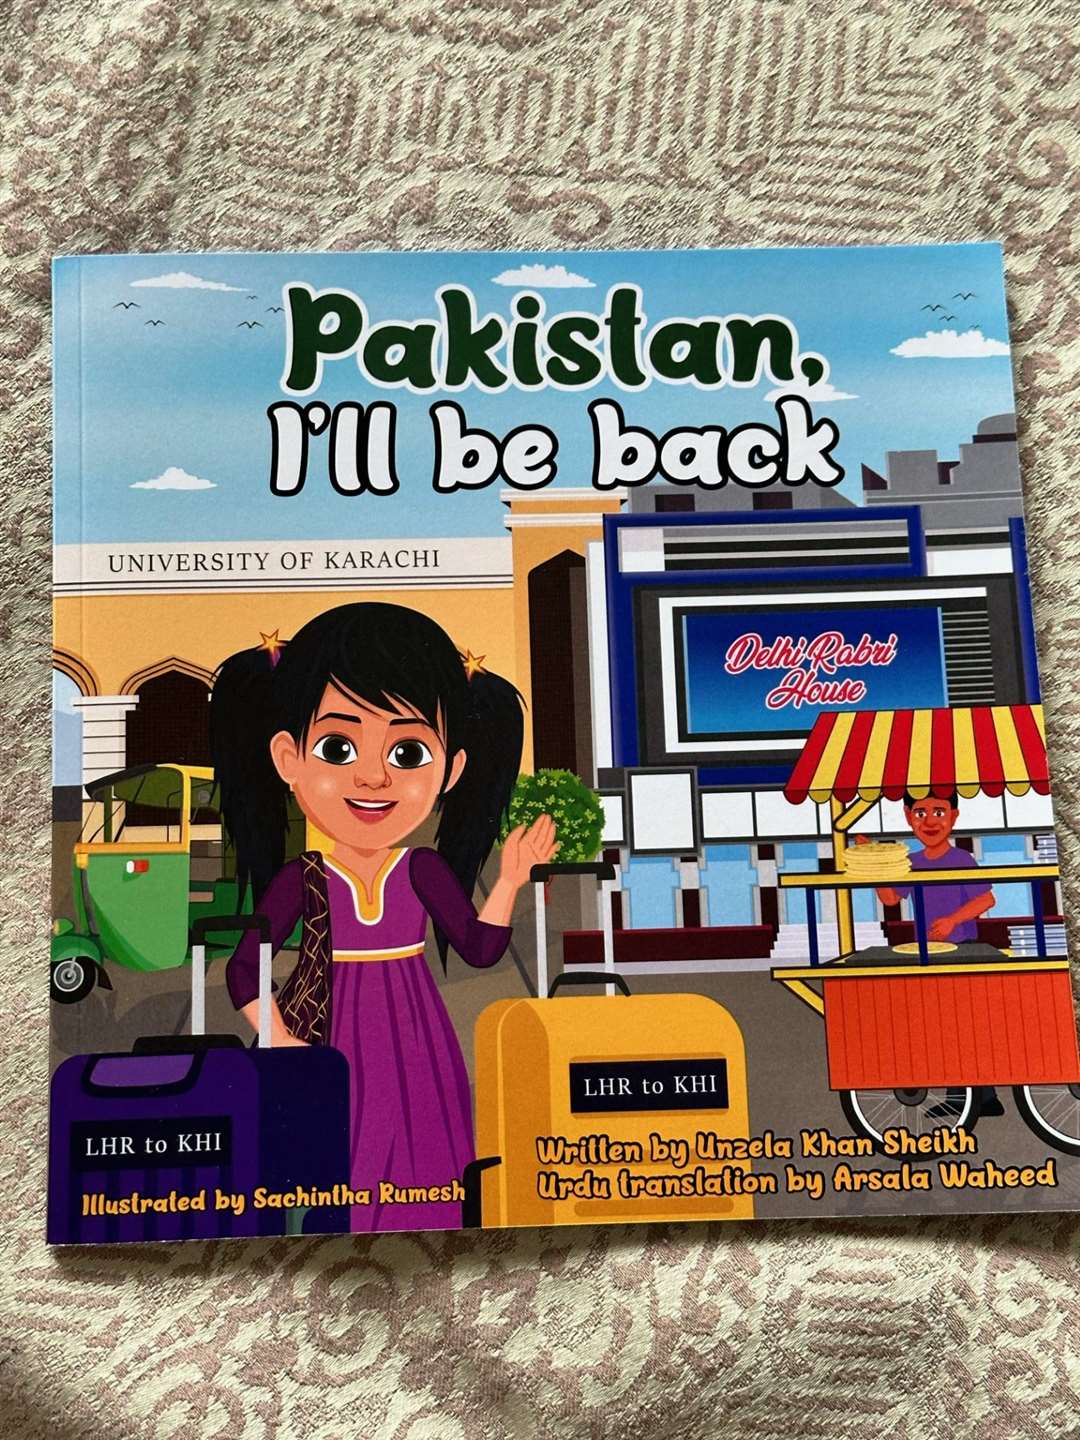 The book, based on Unzela Khan Sheikh’s memories of her visits to Pakistan, features illustrations of her own family members (Unzela Khan Sheikh/PA)